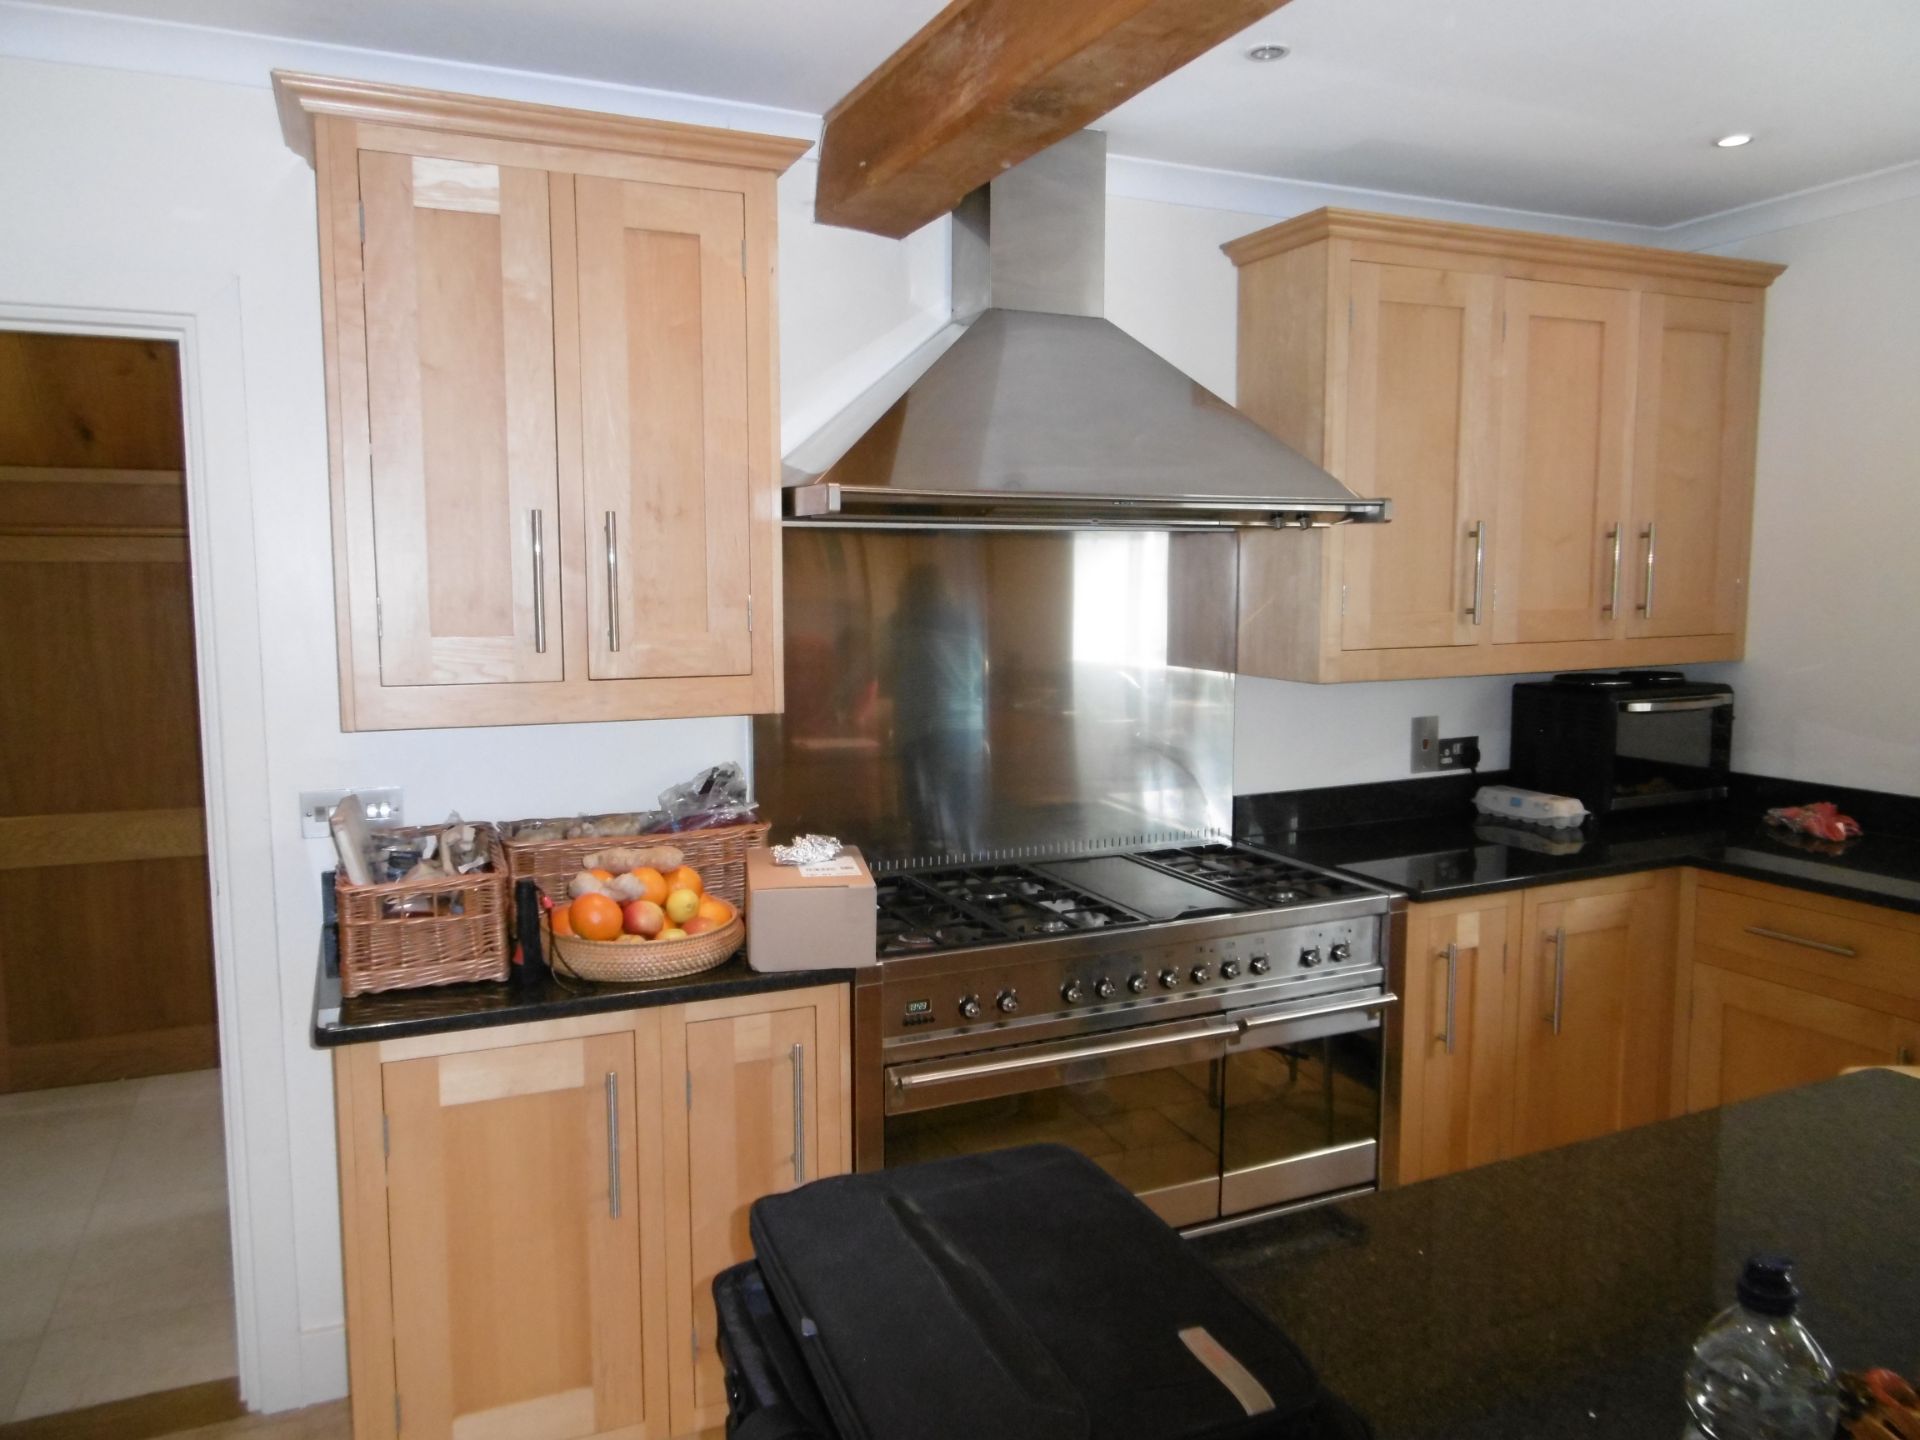 Luxury Used Maple Kitchen with Appliances including Range Cooker